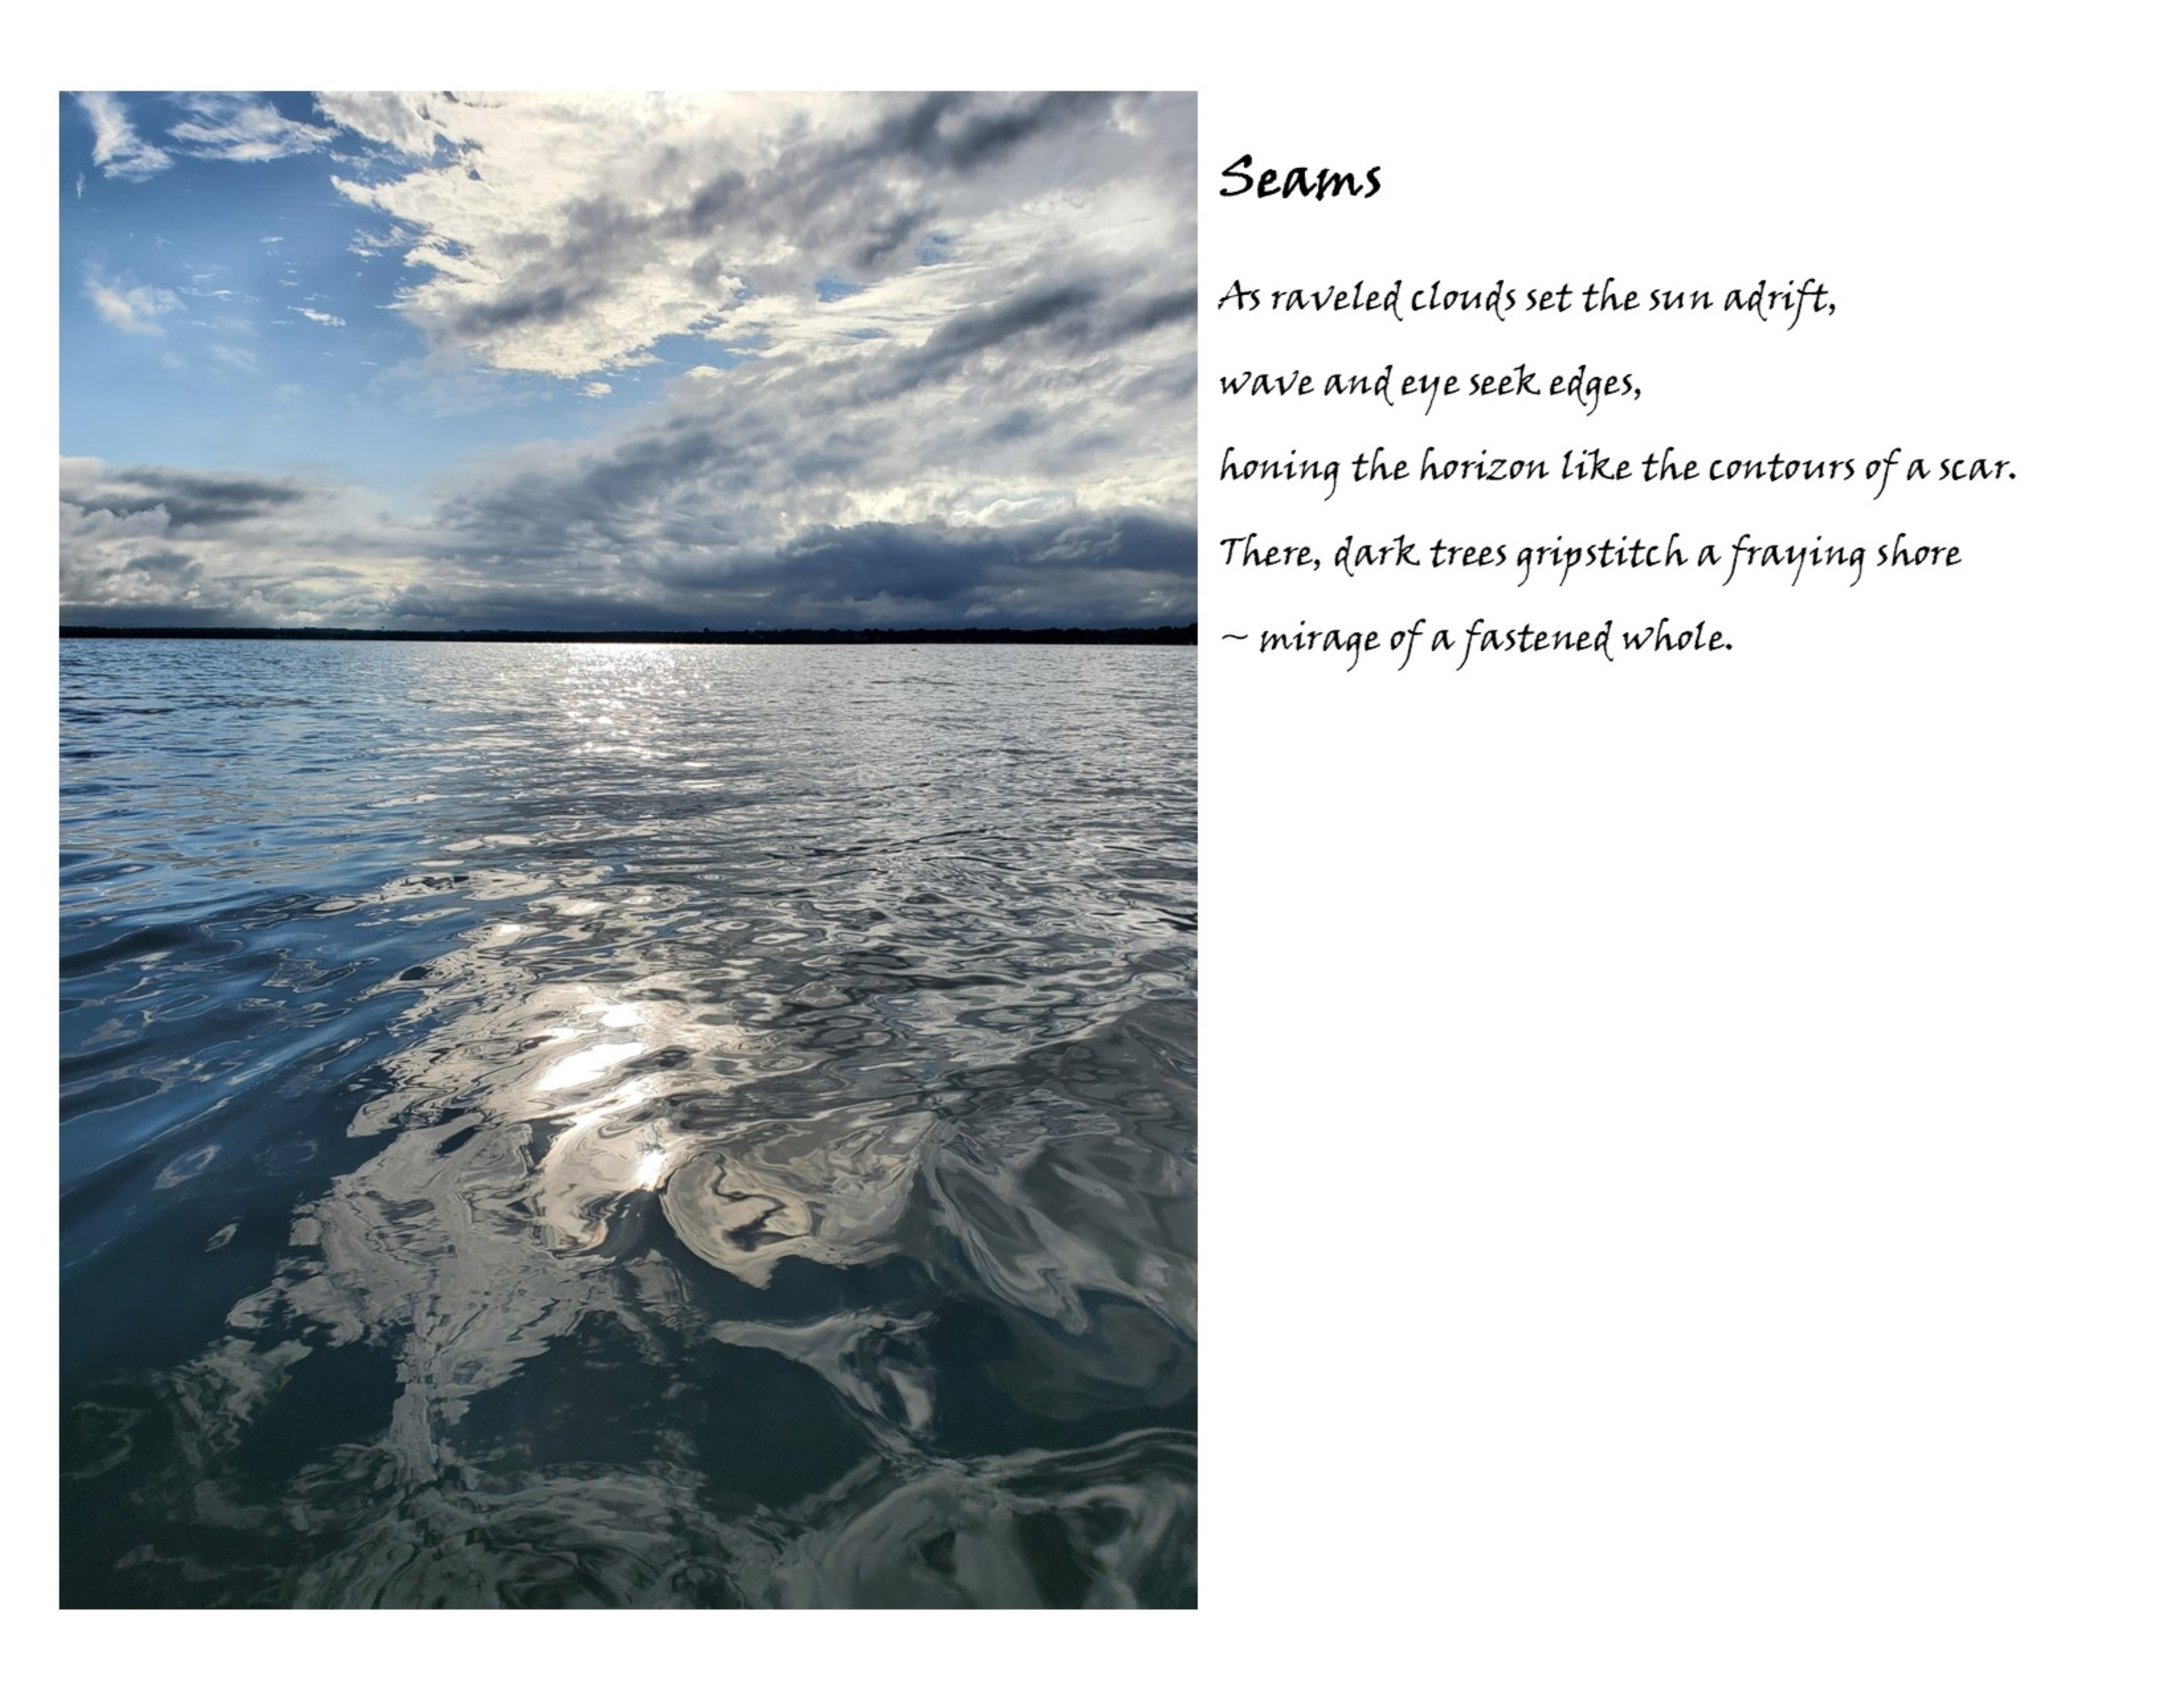 Photo of open water with blue sky and clouds with poem beside it